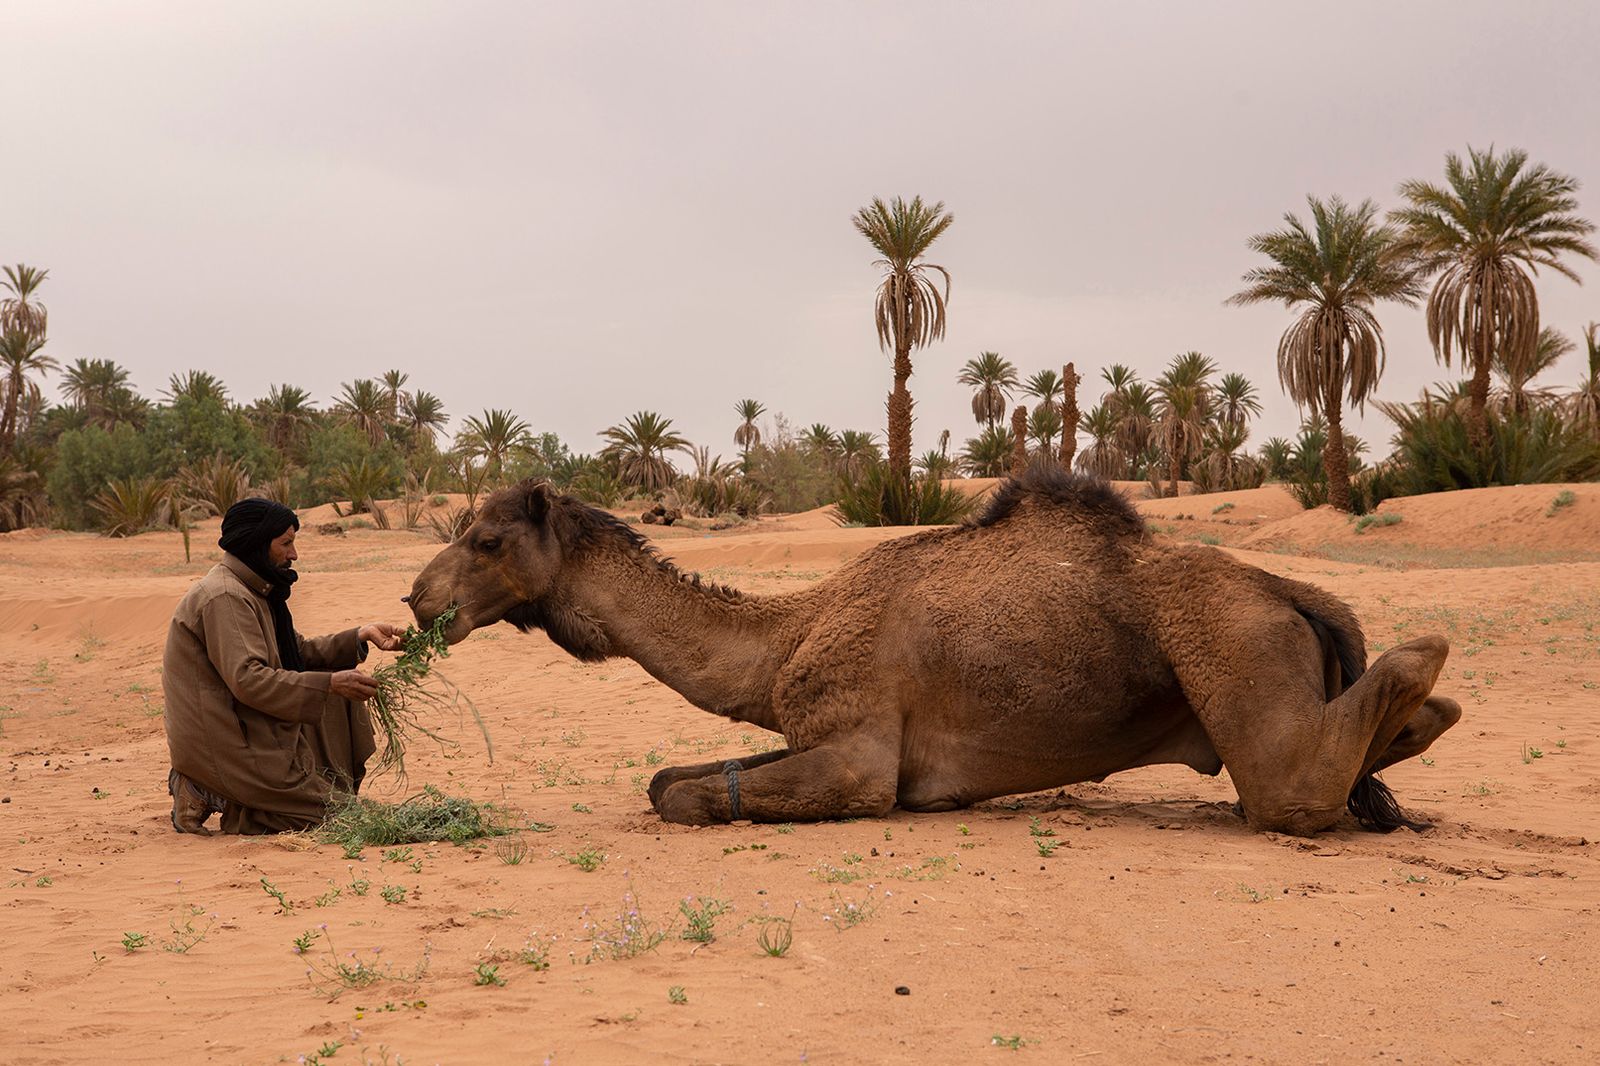 © Matilde Gattoni - Morocco - M’hamid - A villager feeds his camel with herbs picked in the dry river bed of the Draa.